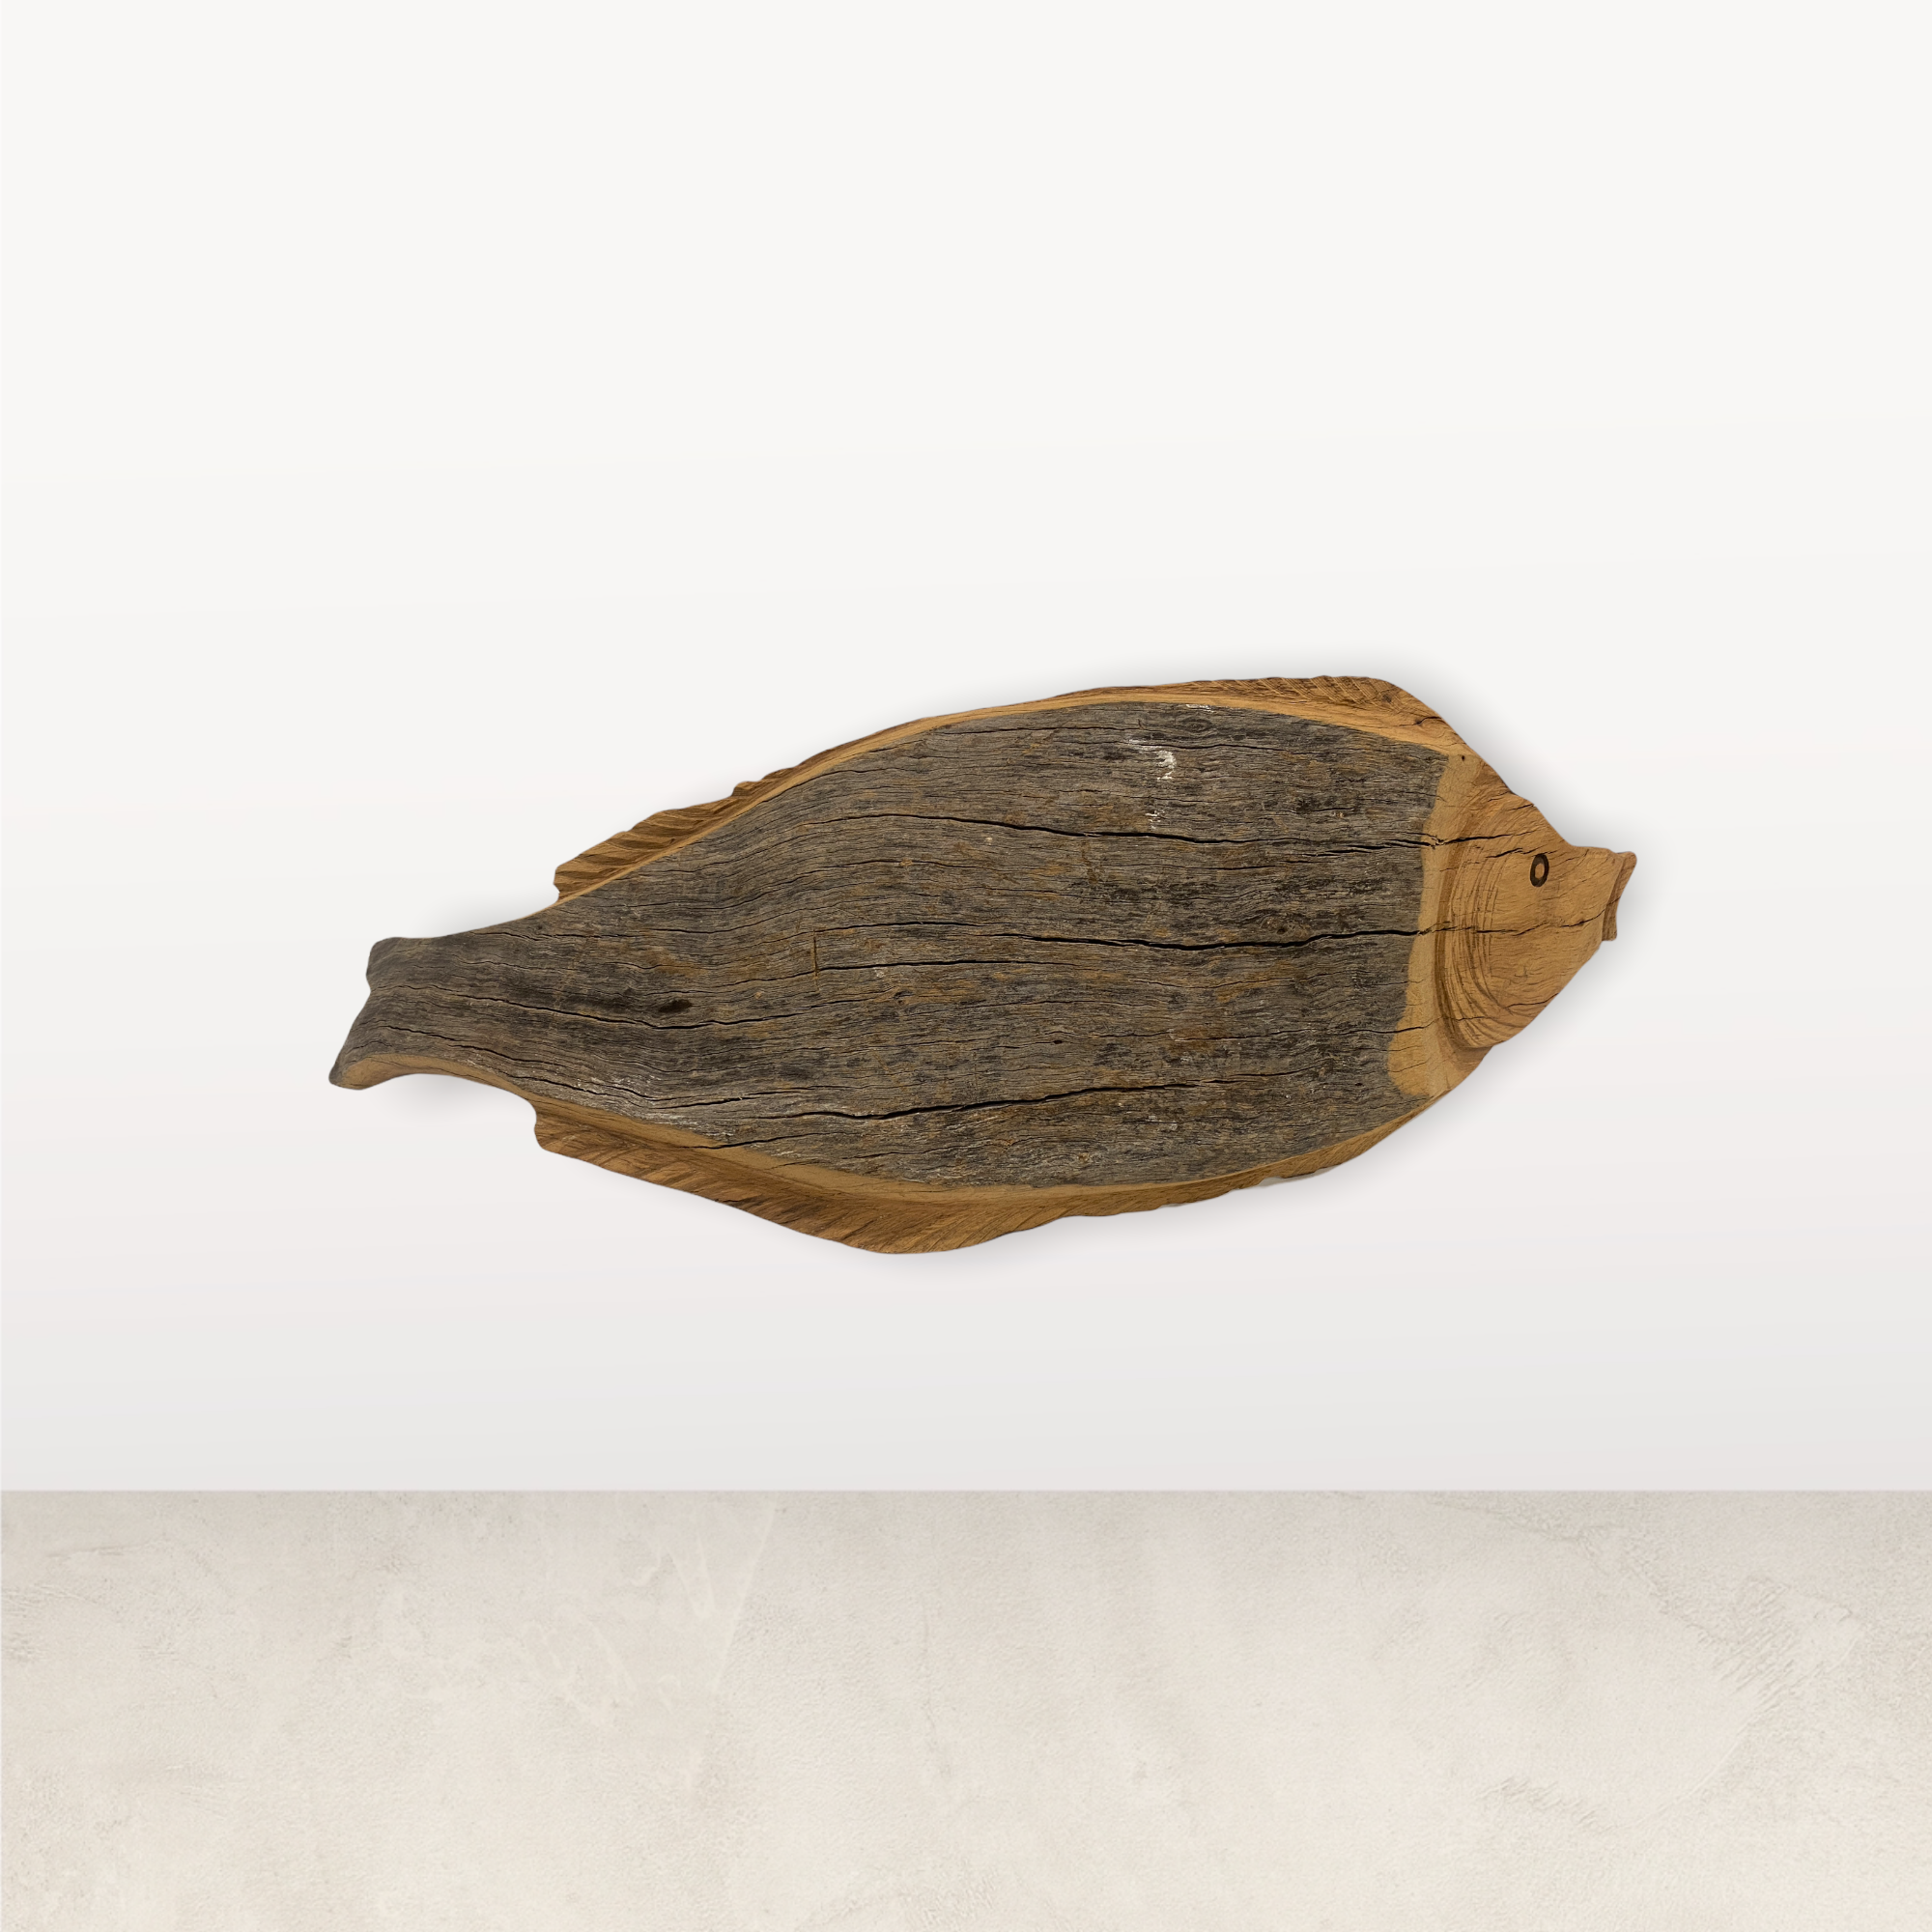 Driftwood Hand Carved Fish - (L11.4)